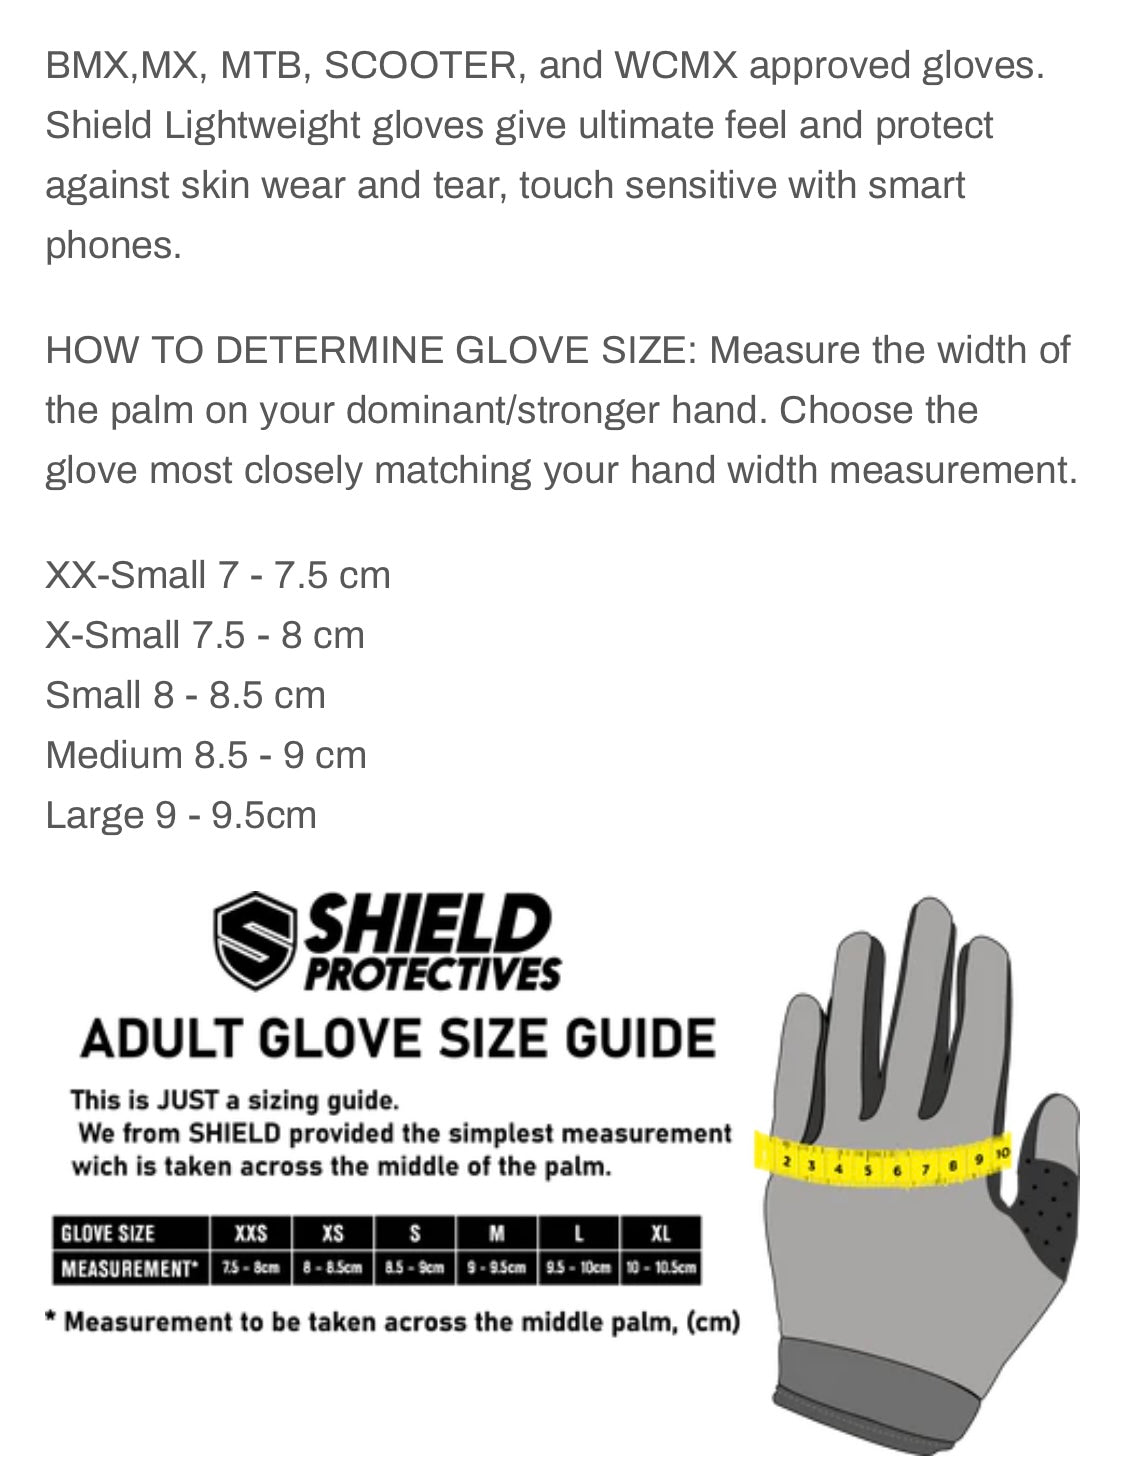 Shield Protectives Lightweight Gloves